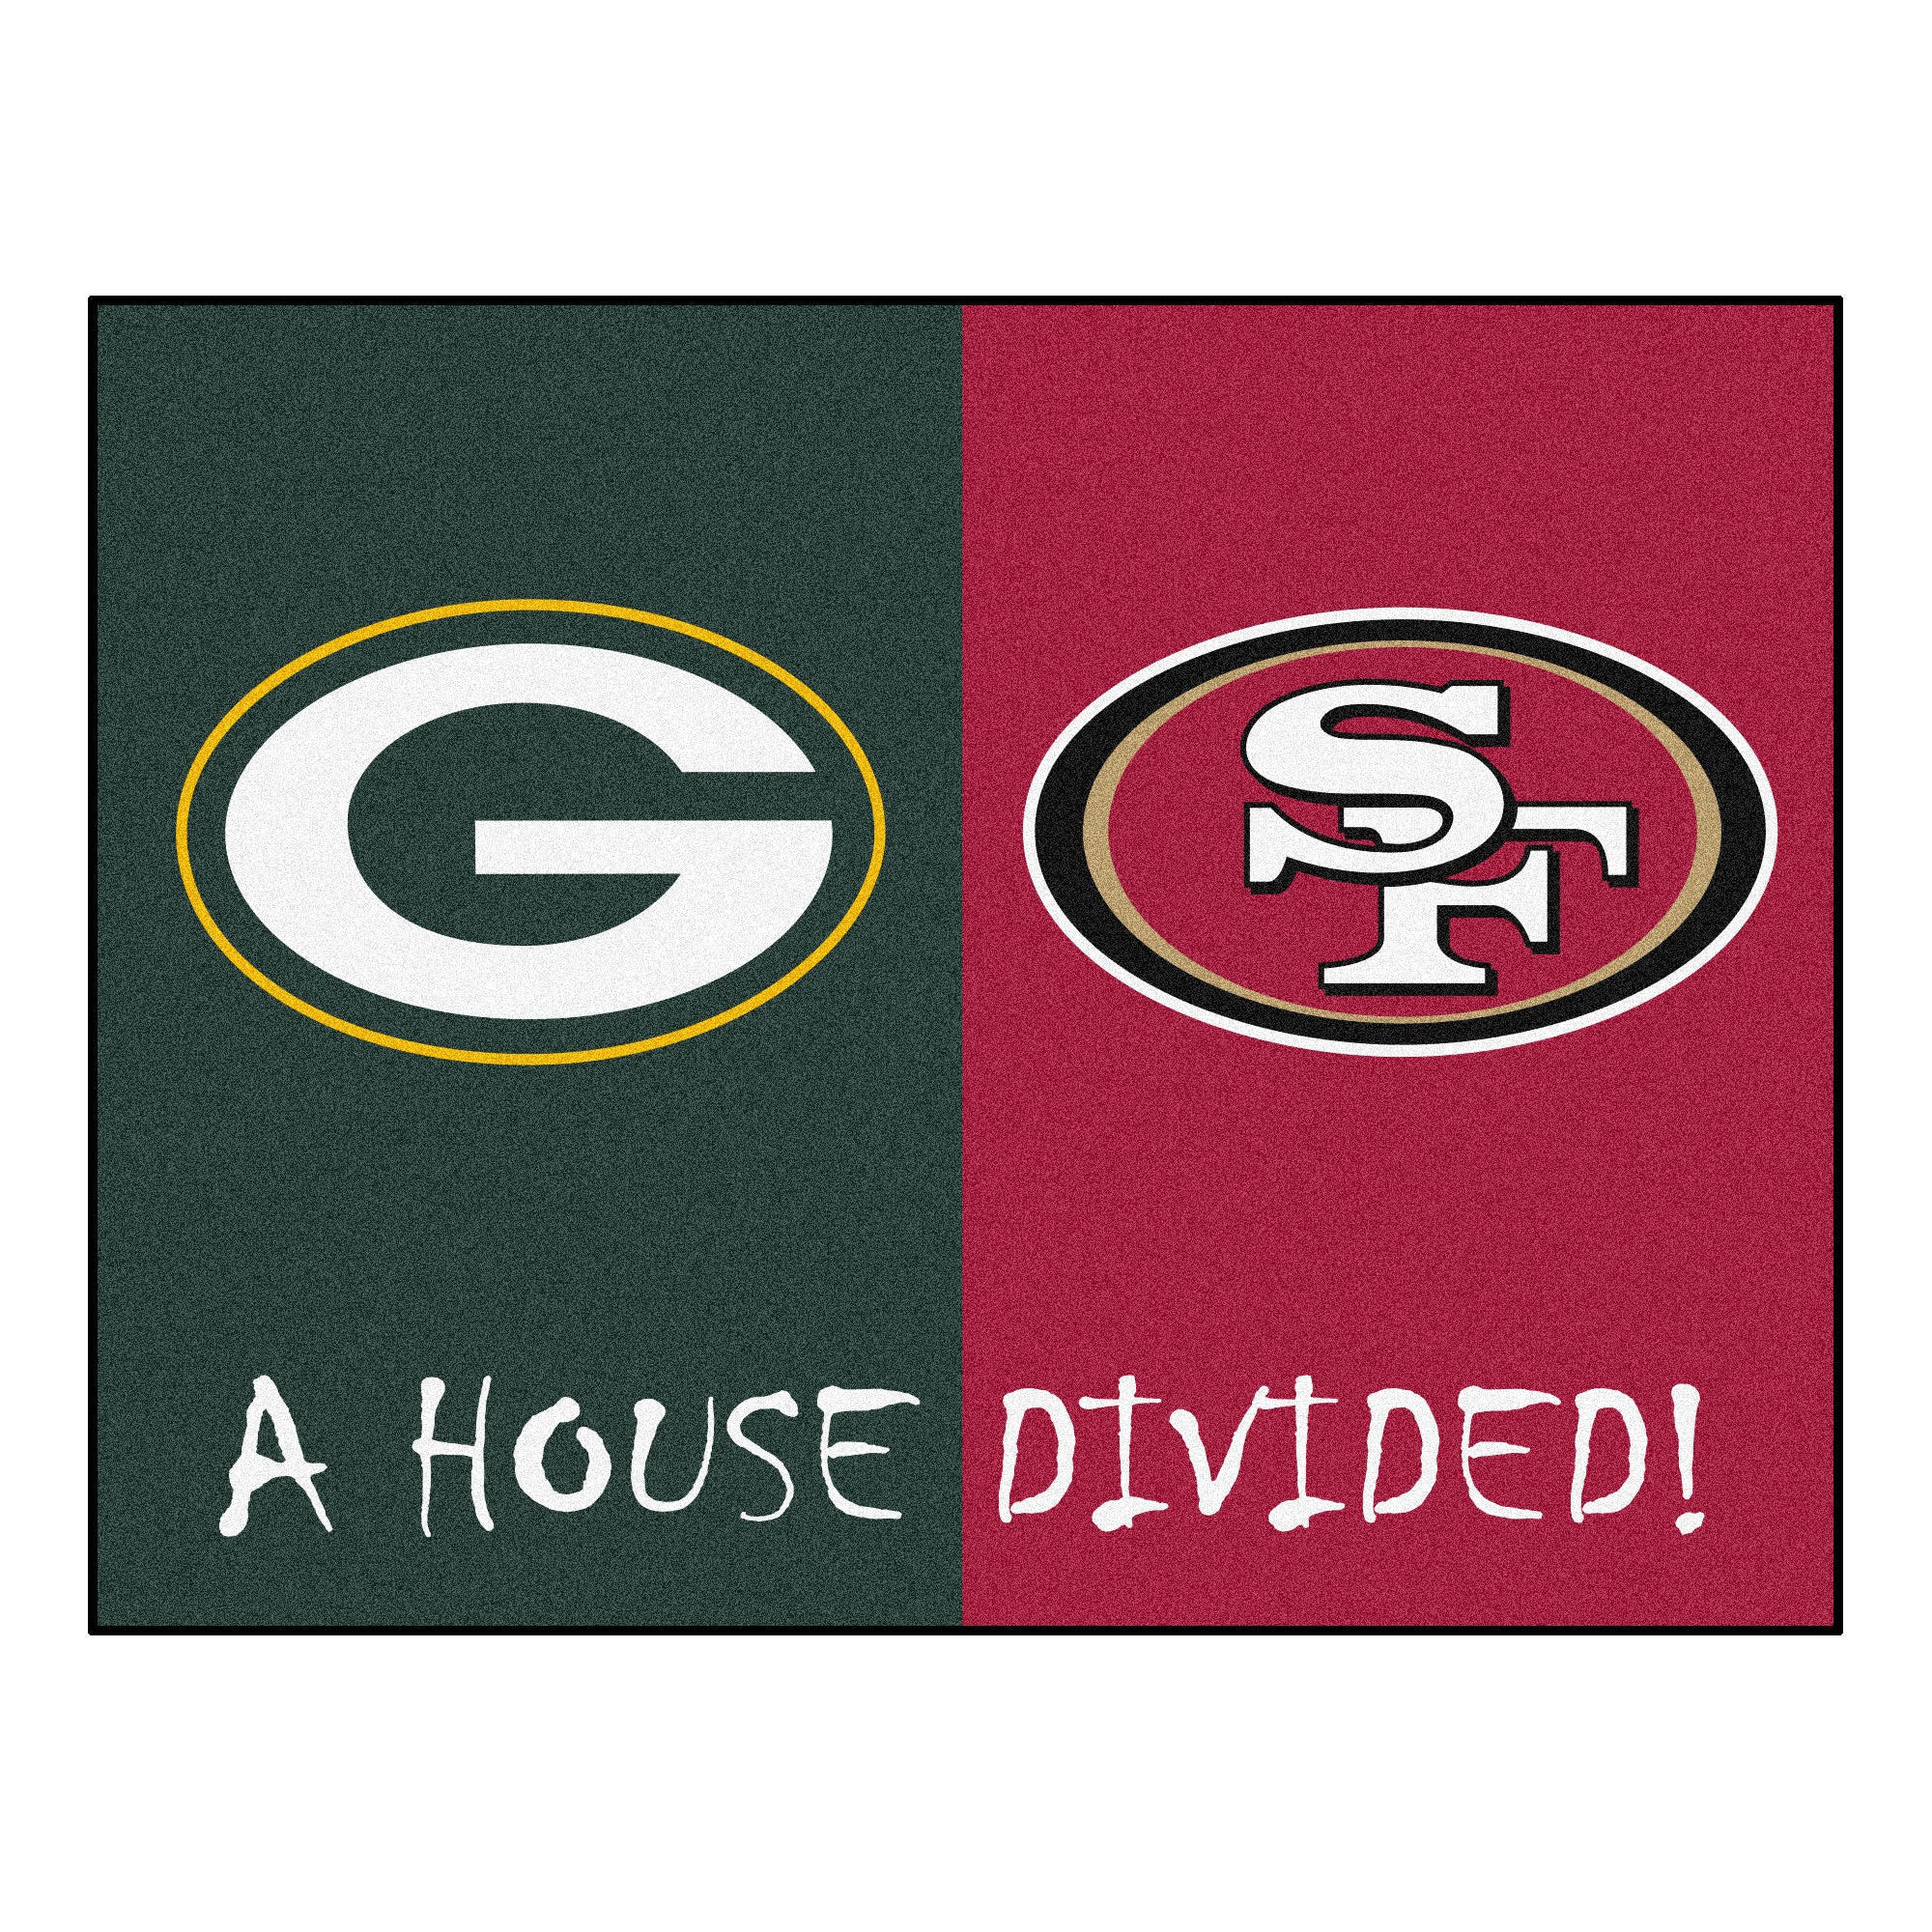 NFL House Divided - Packers / 49ers House Divided Mat